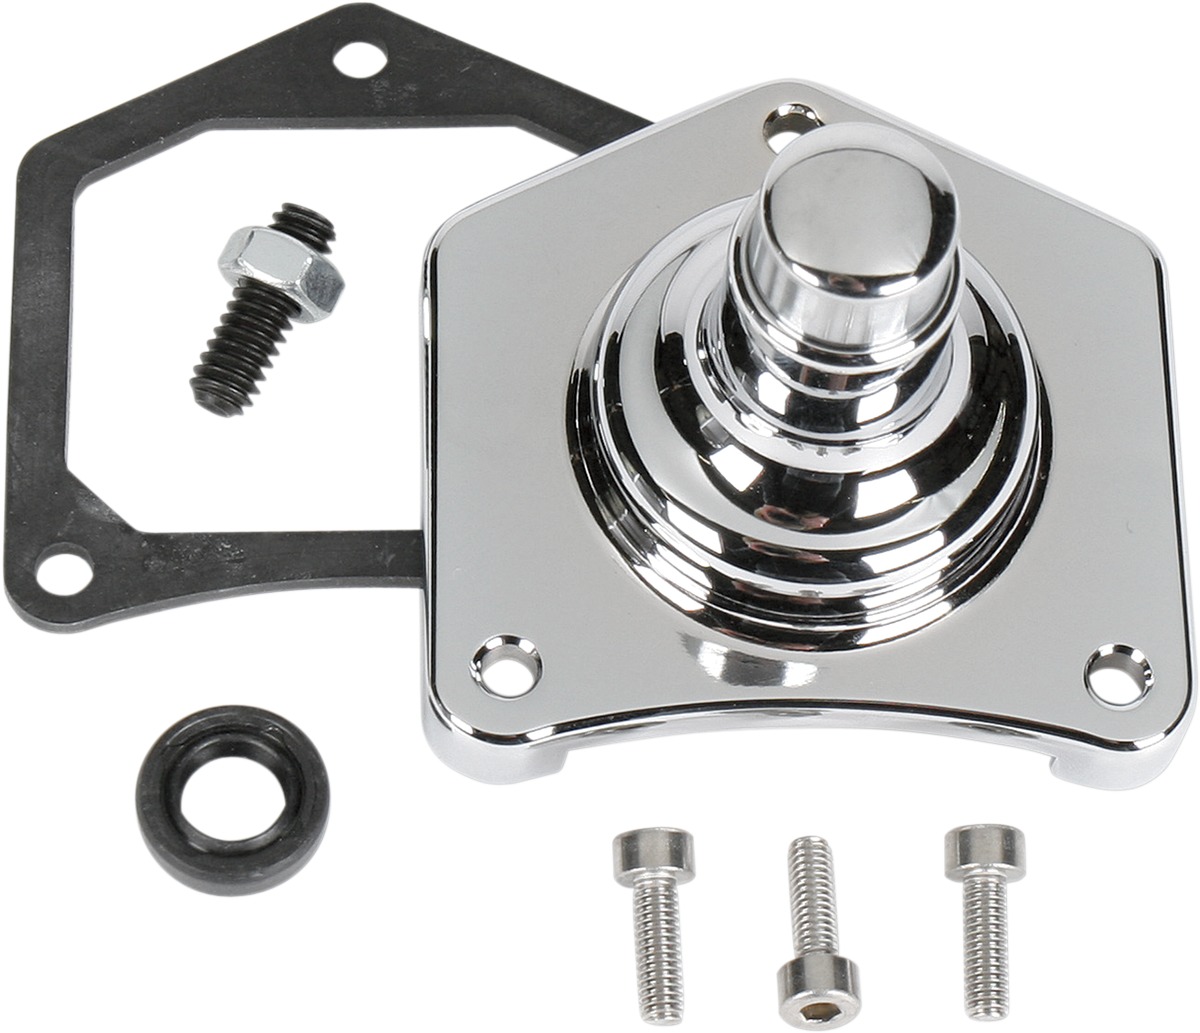 Supertorque Starter Button Chrome - For 89-93 Harley Touring Softail - Click Image to Close